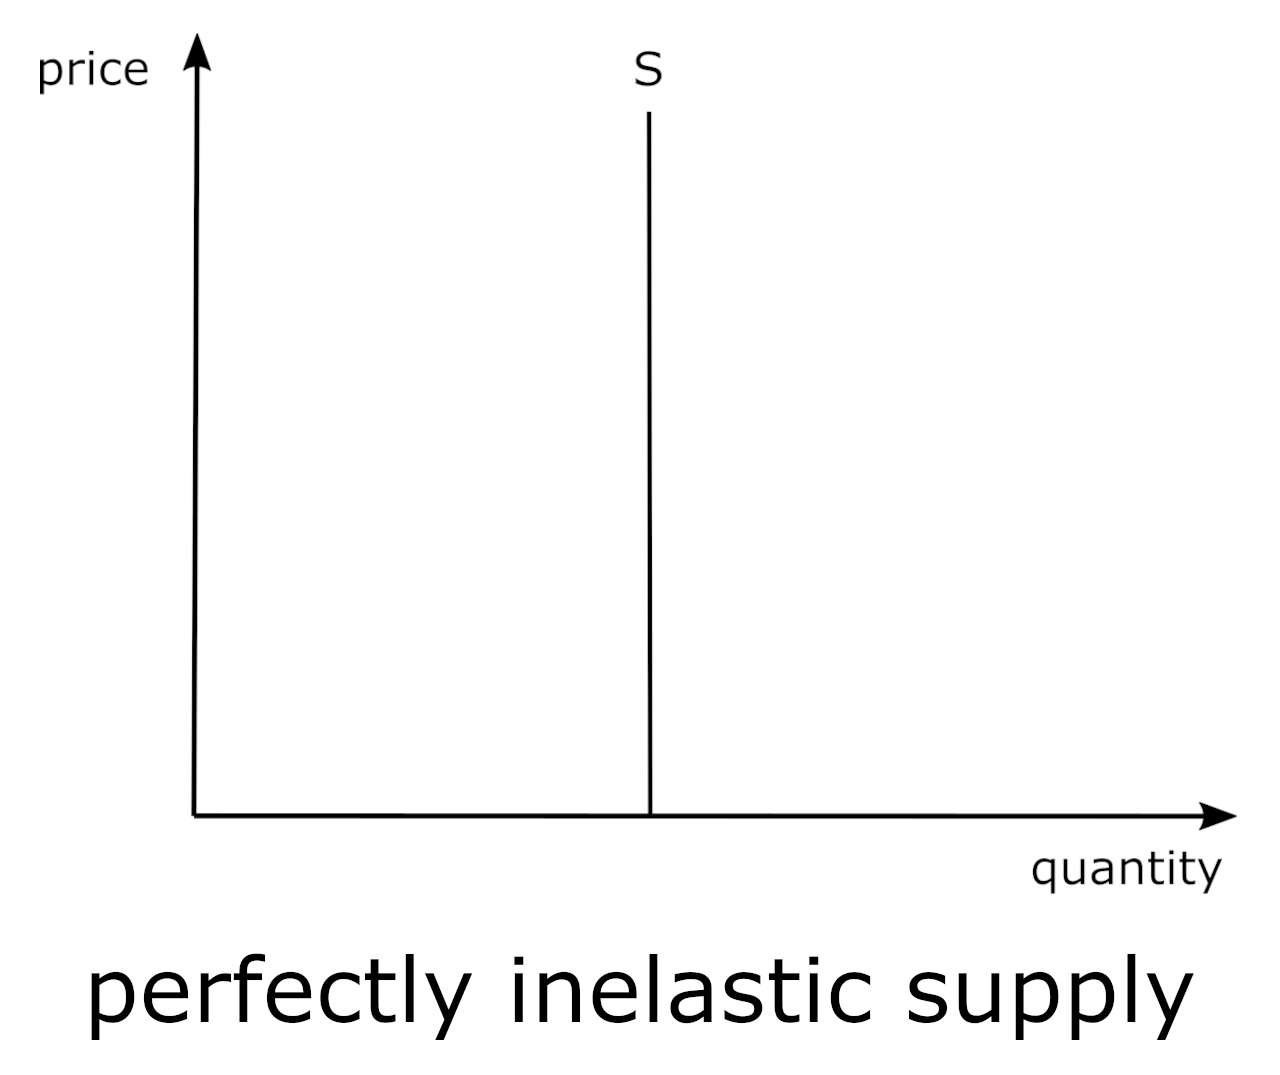 chart showing a perfectly inelastic supply curve